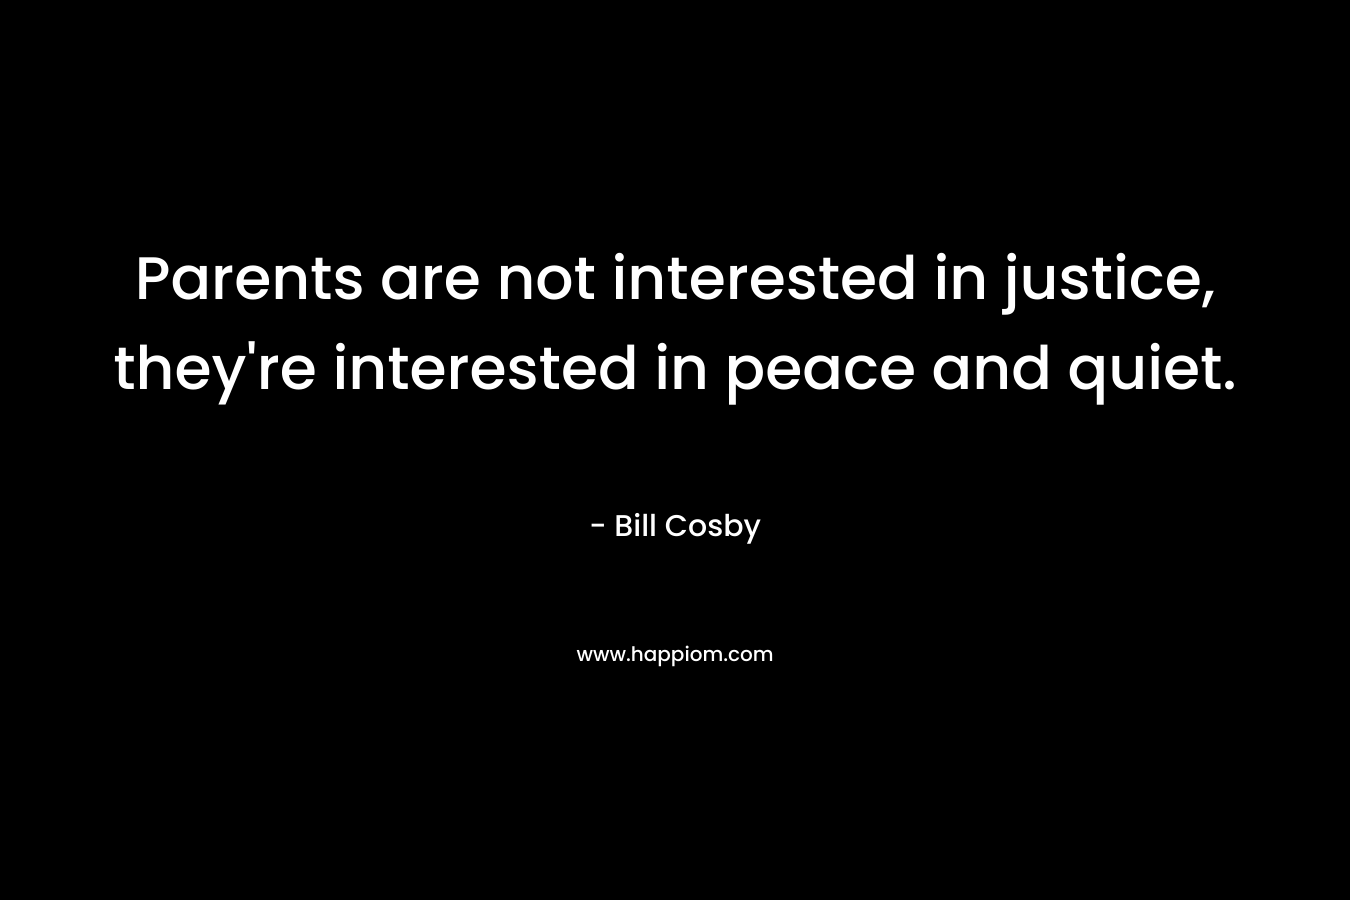 Parents are not interested in justice, they're interested in peace and quiet.